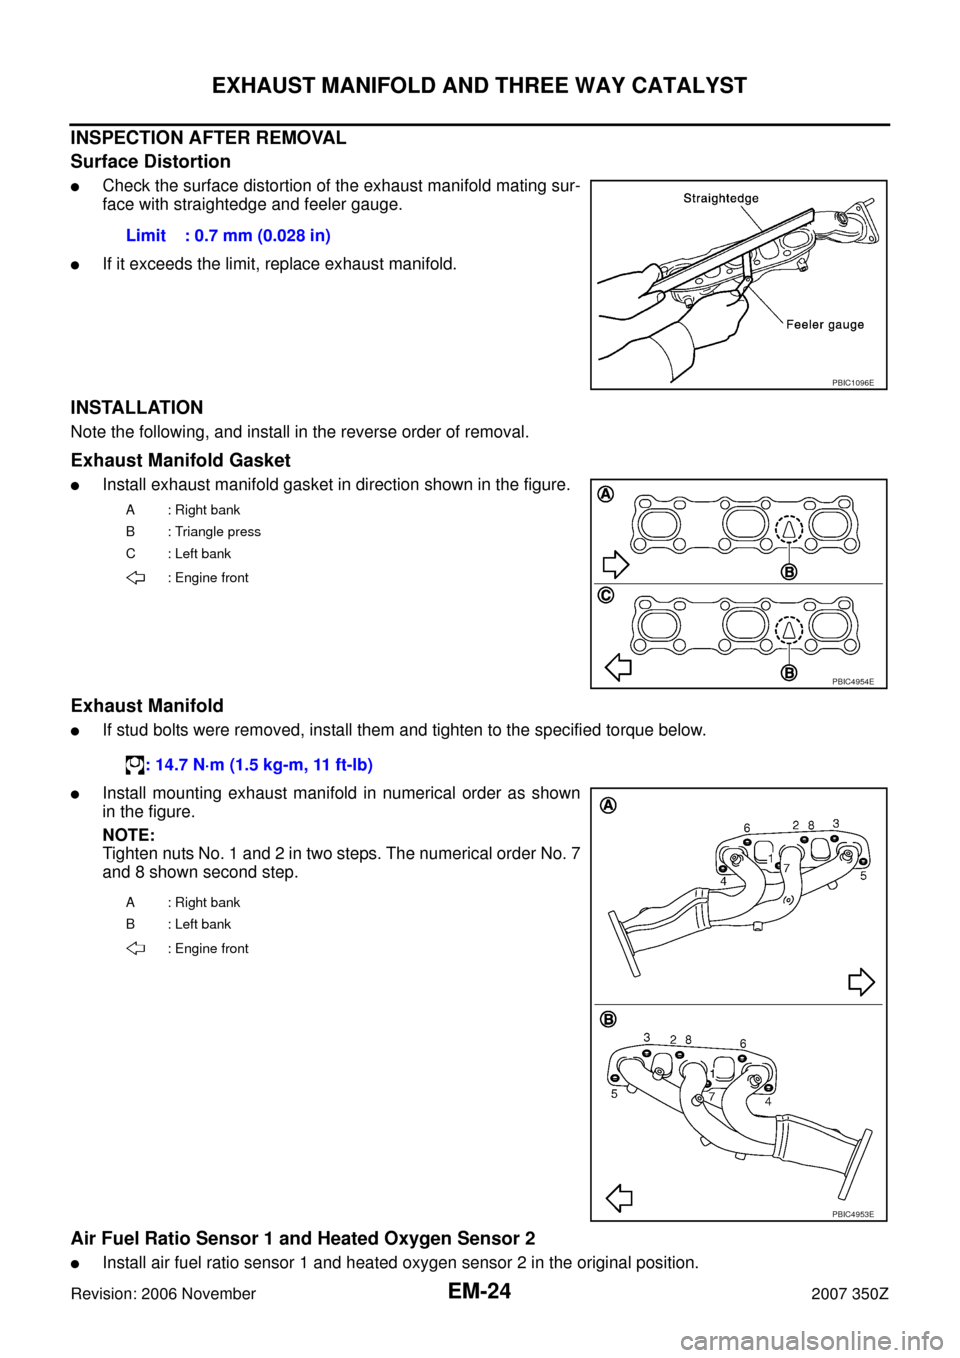 NISSAN 350Z 2007 Z33 Engine Mechanical Owners Manual EM-24
EXHAUST MANIFOLD AND THREE WAY CATALYST
Revision: 2006 November2007 350Z
INSPECTION AFTER REMOVAL
Surface Distortion
Check the surface distortion of the exhaust manifold mating sur-
face with s